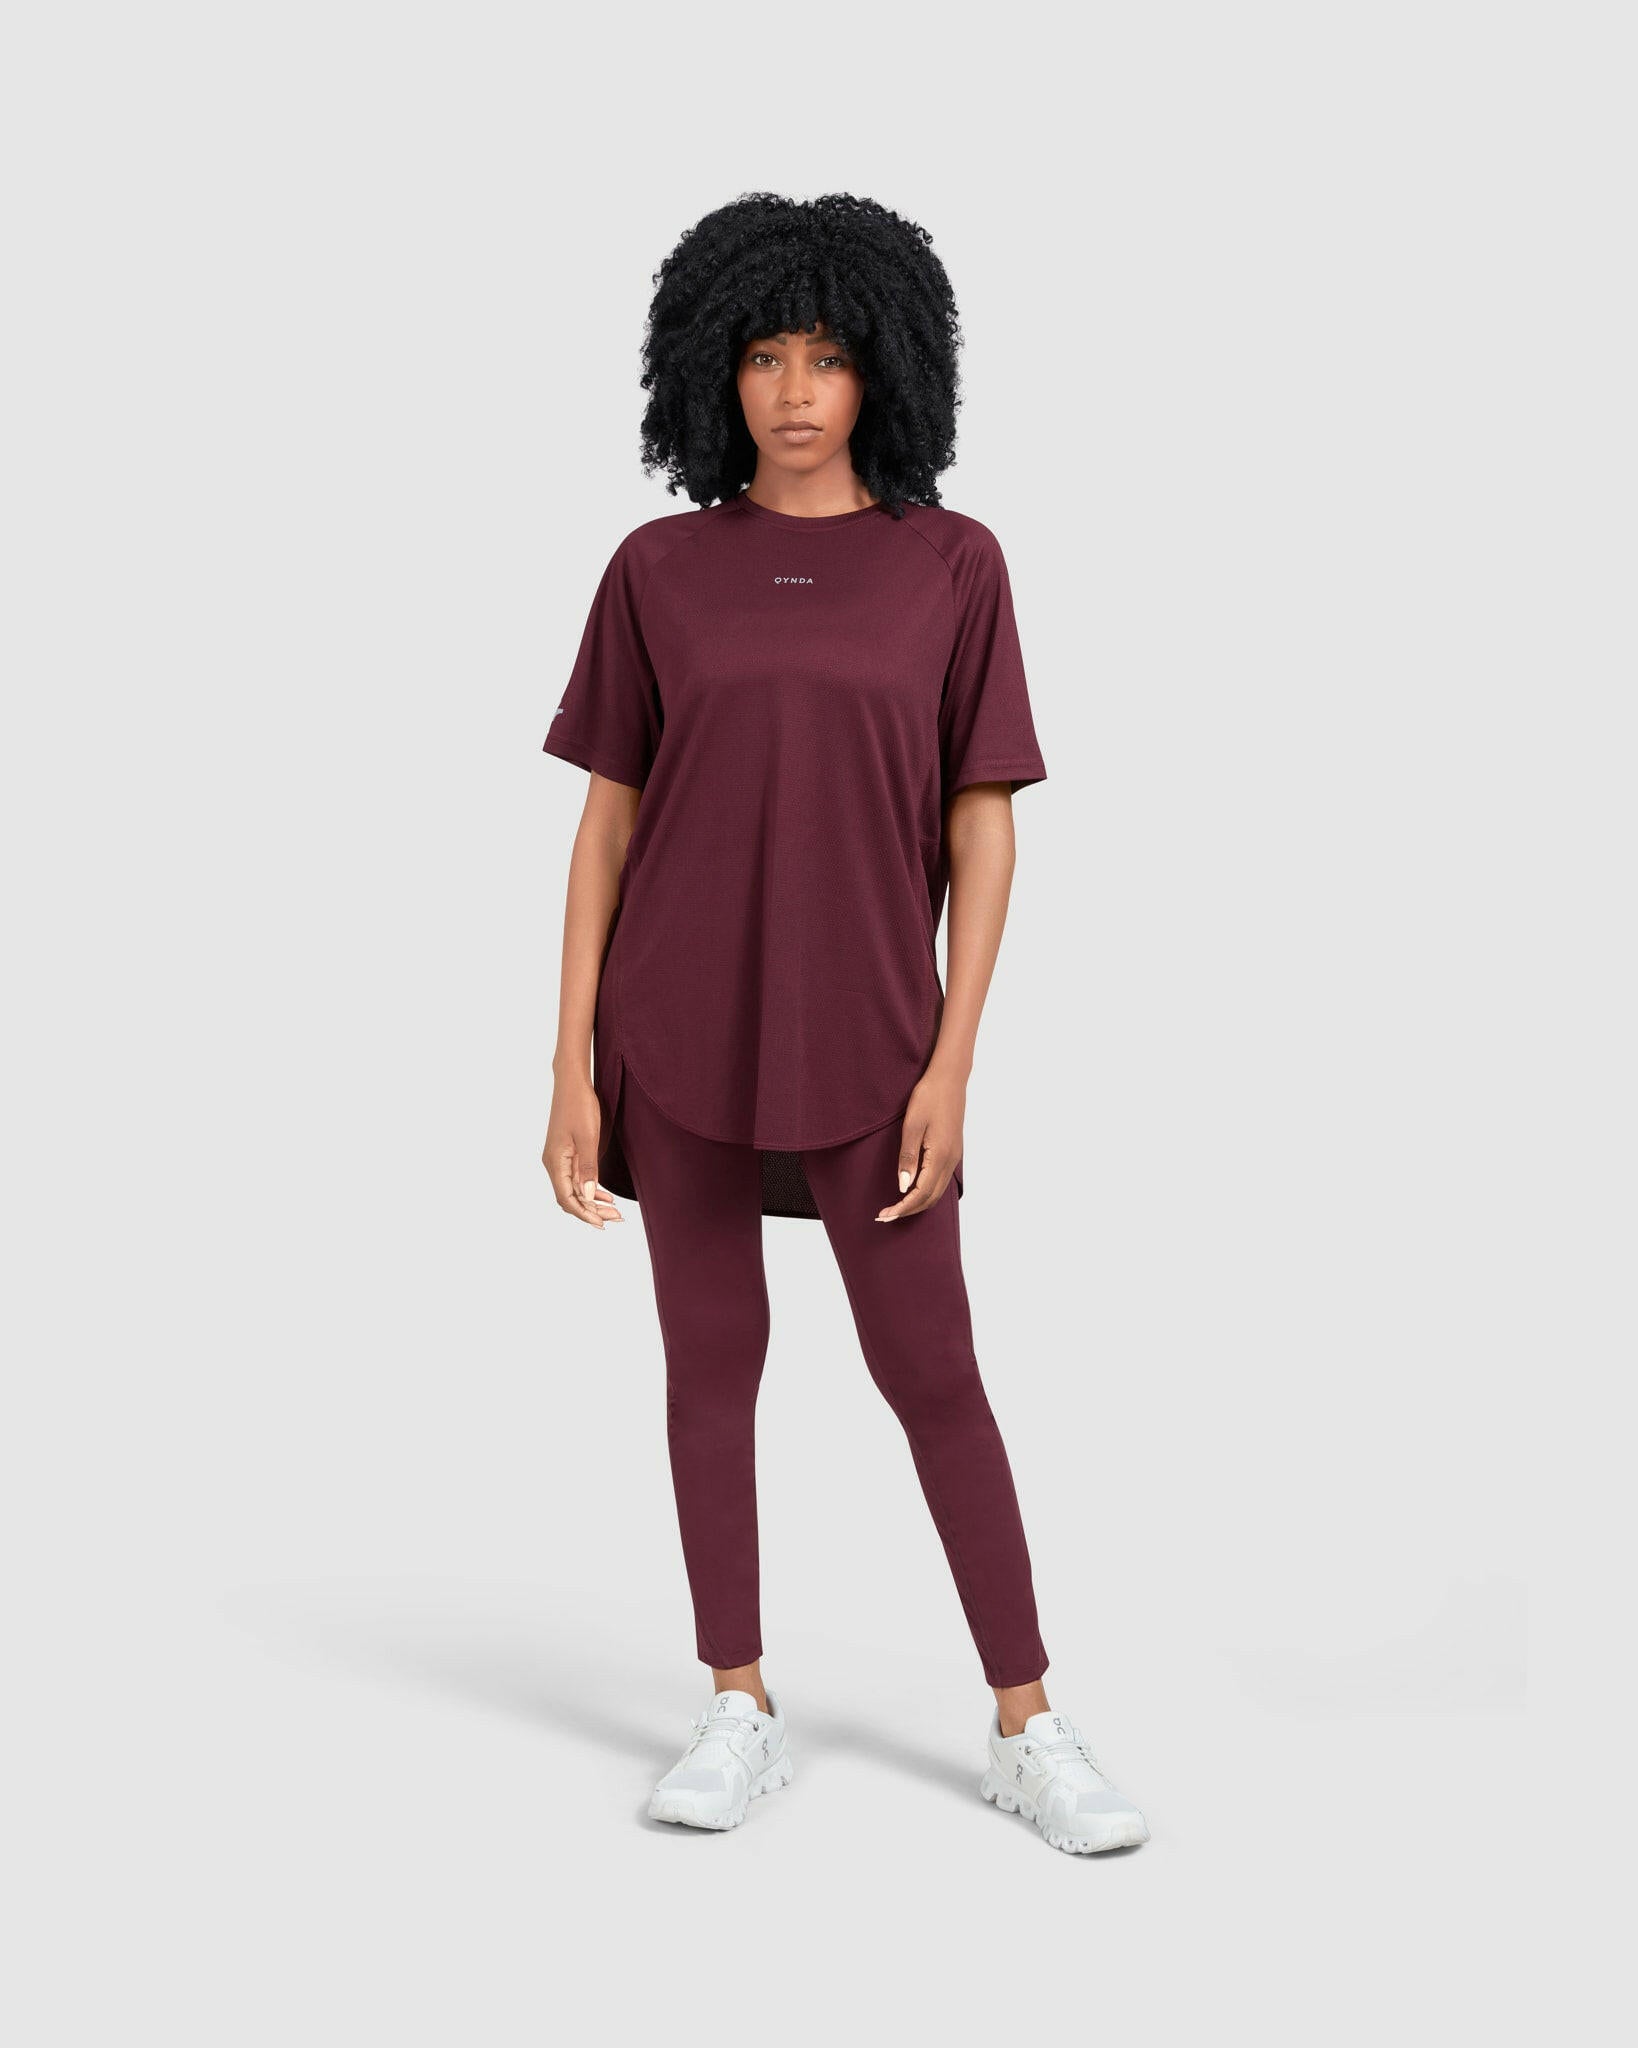 A woman stands against a neutral background, modeling a casual maroon activewear outfit comprising a short sleeve BREATHE T-SHIRT, by Qynda brand, designed for breathability, and leggings, paired with white sneakers. Her hair is styled